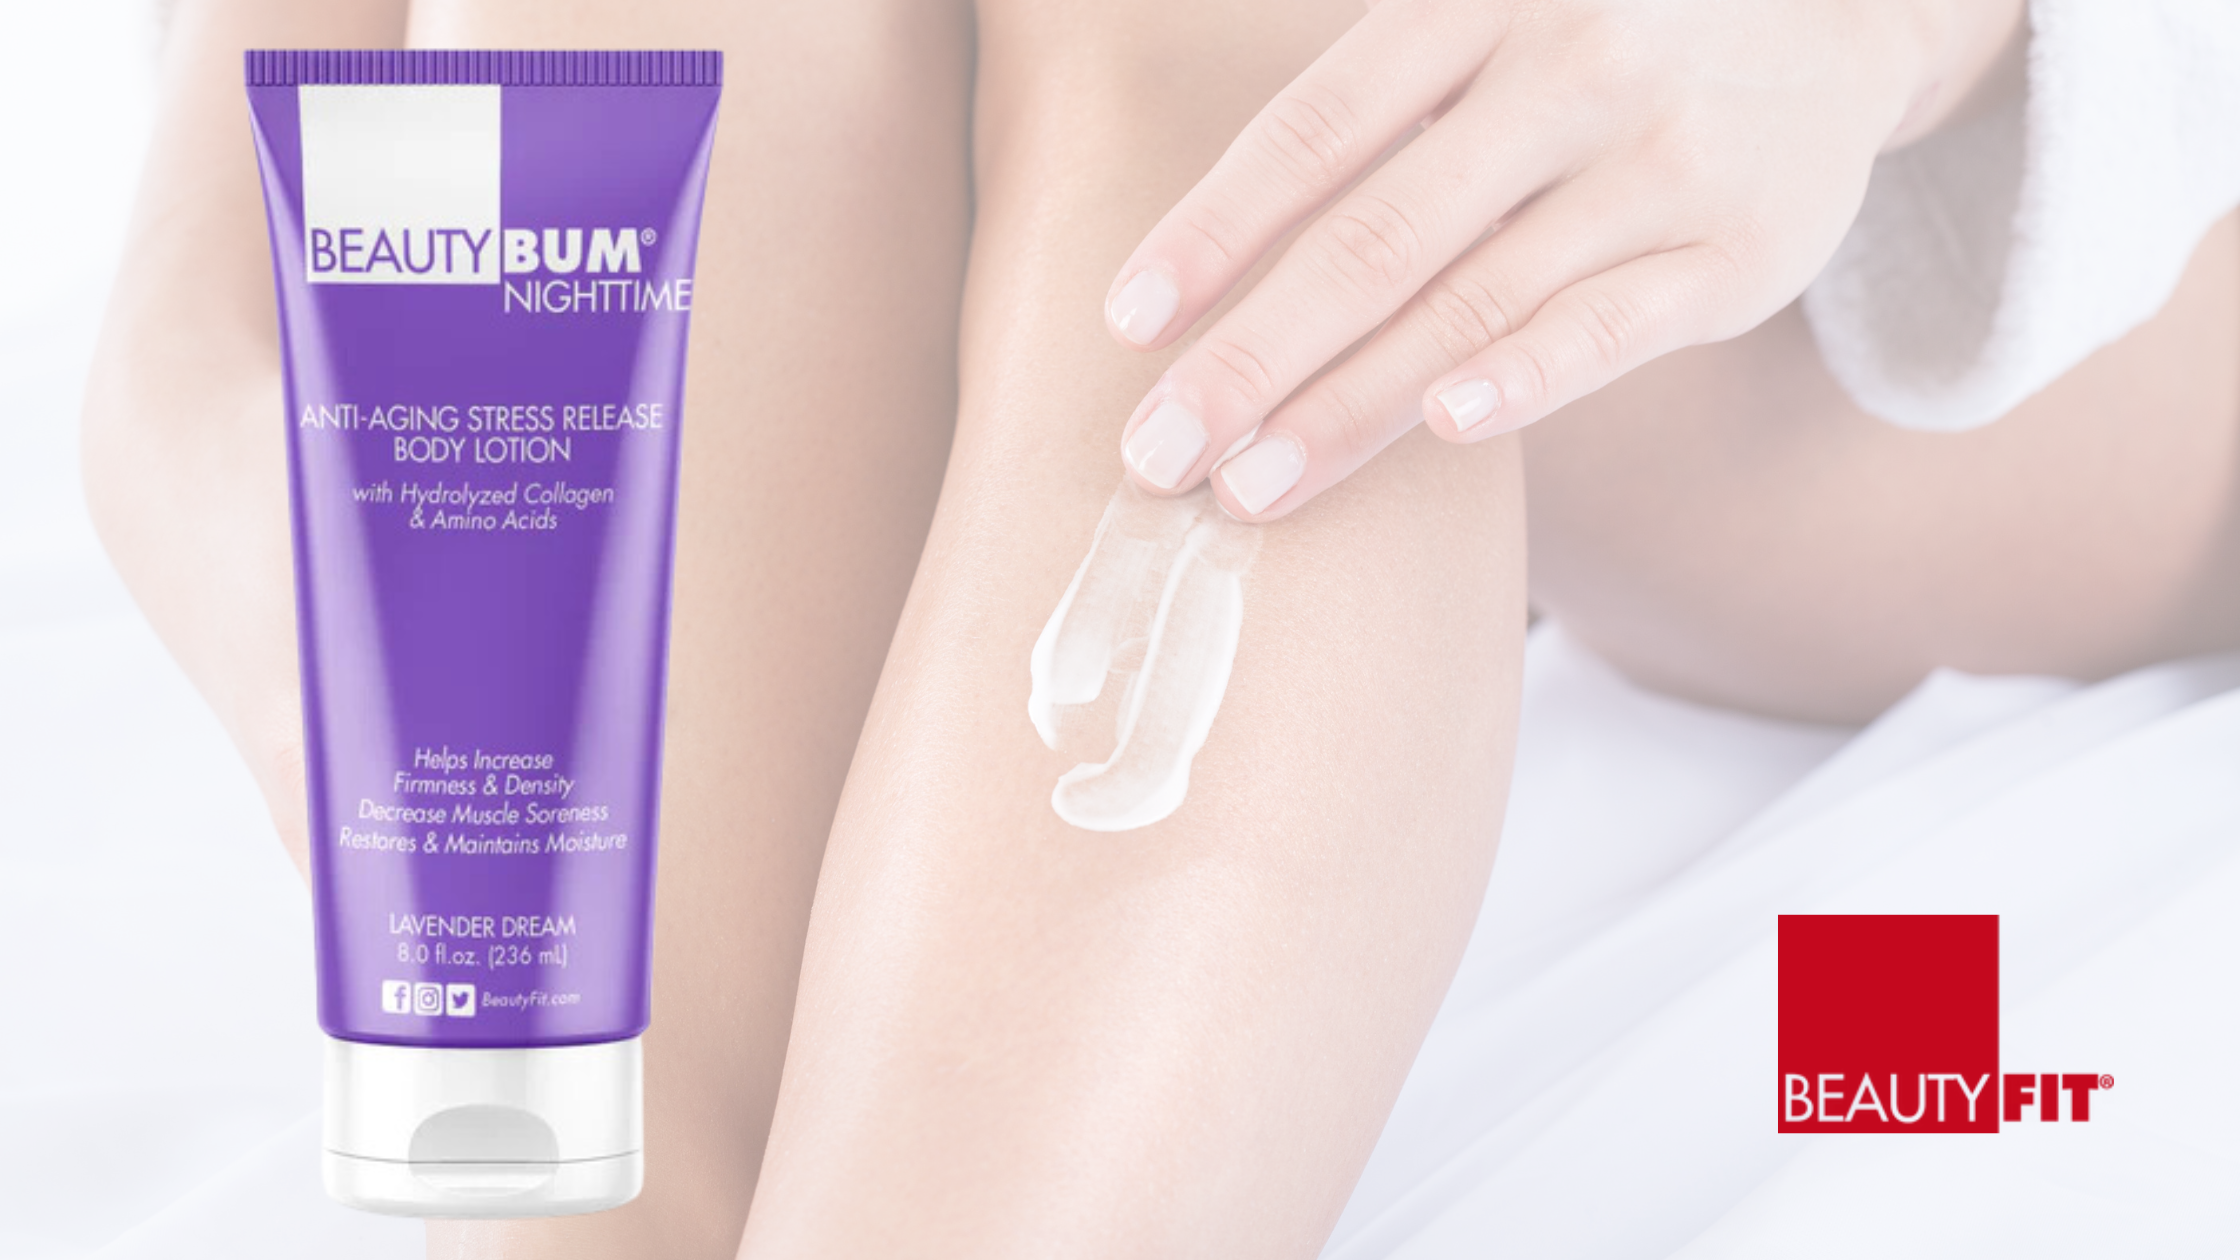 Achieve Your Dream Body While You Sleep with BeautyBum® Anti-Aging Stress Body Lotion